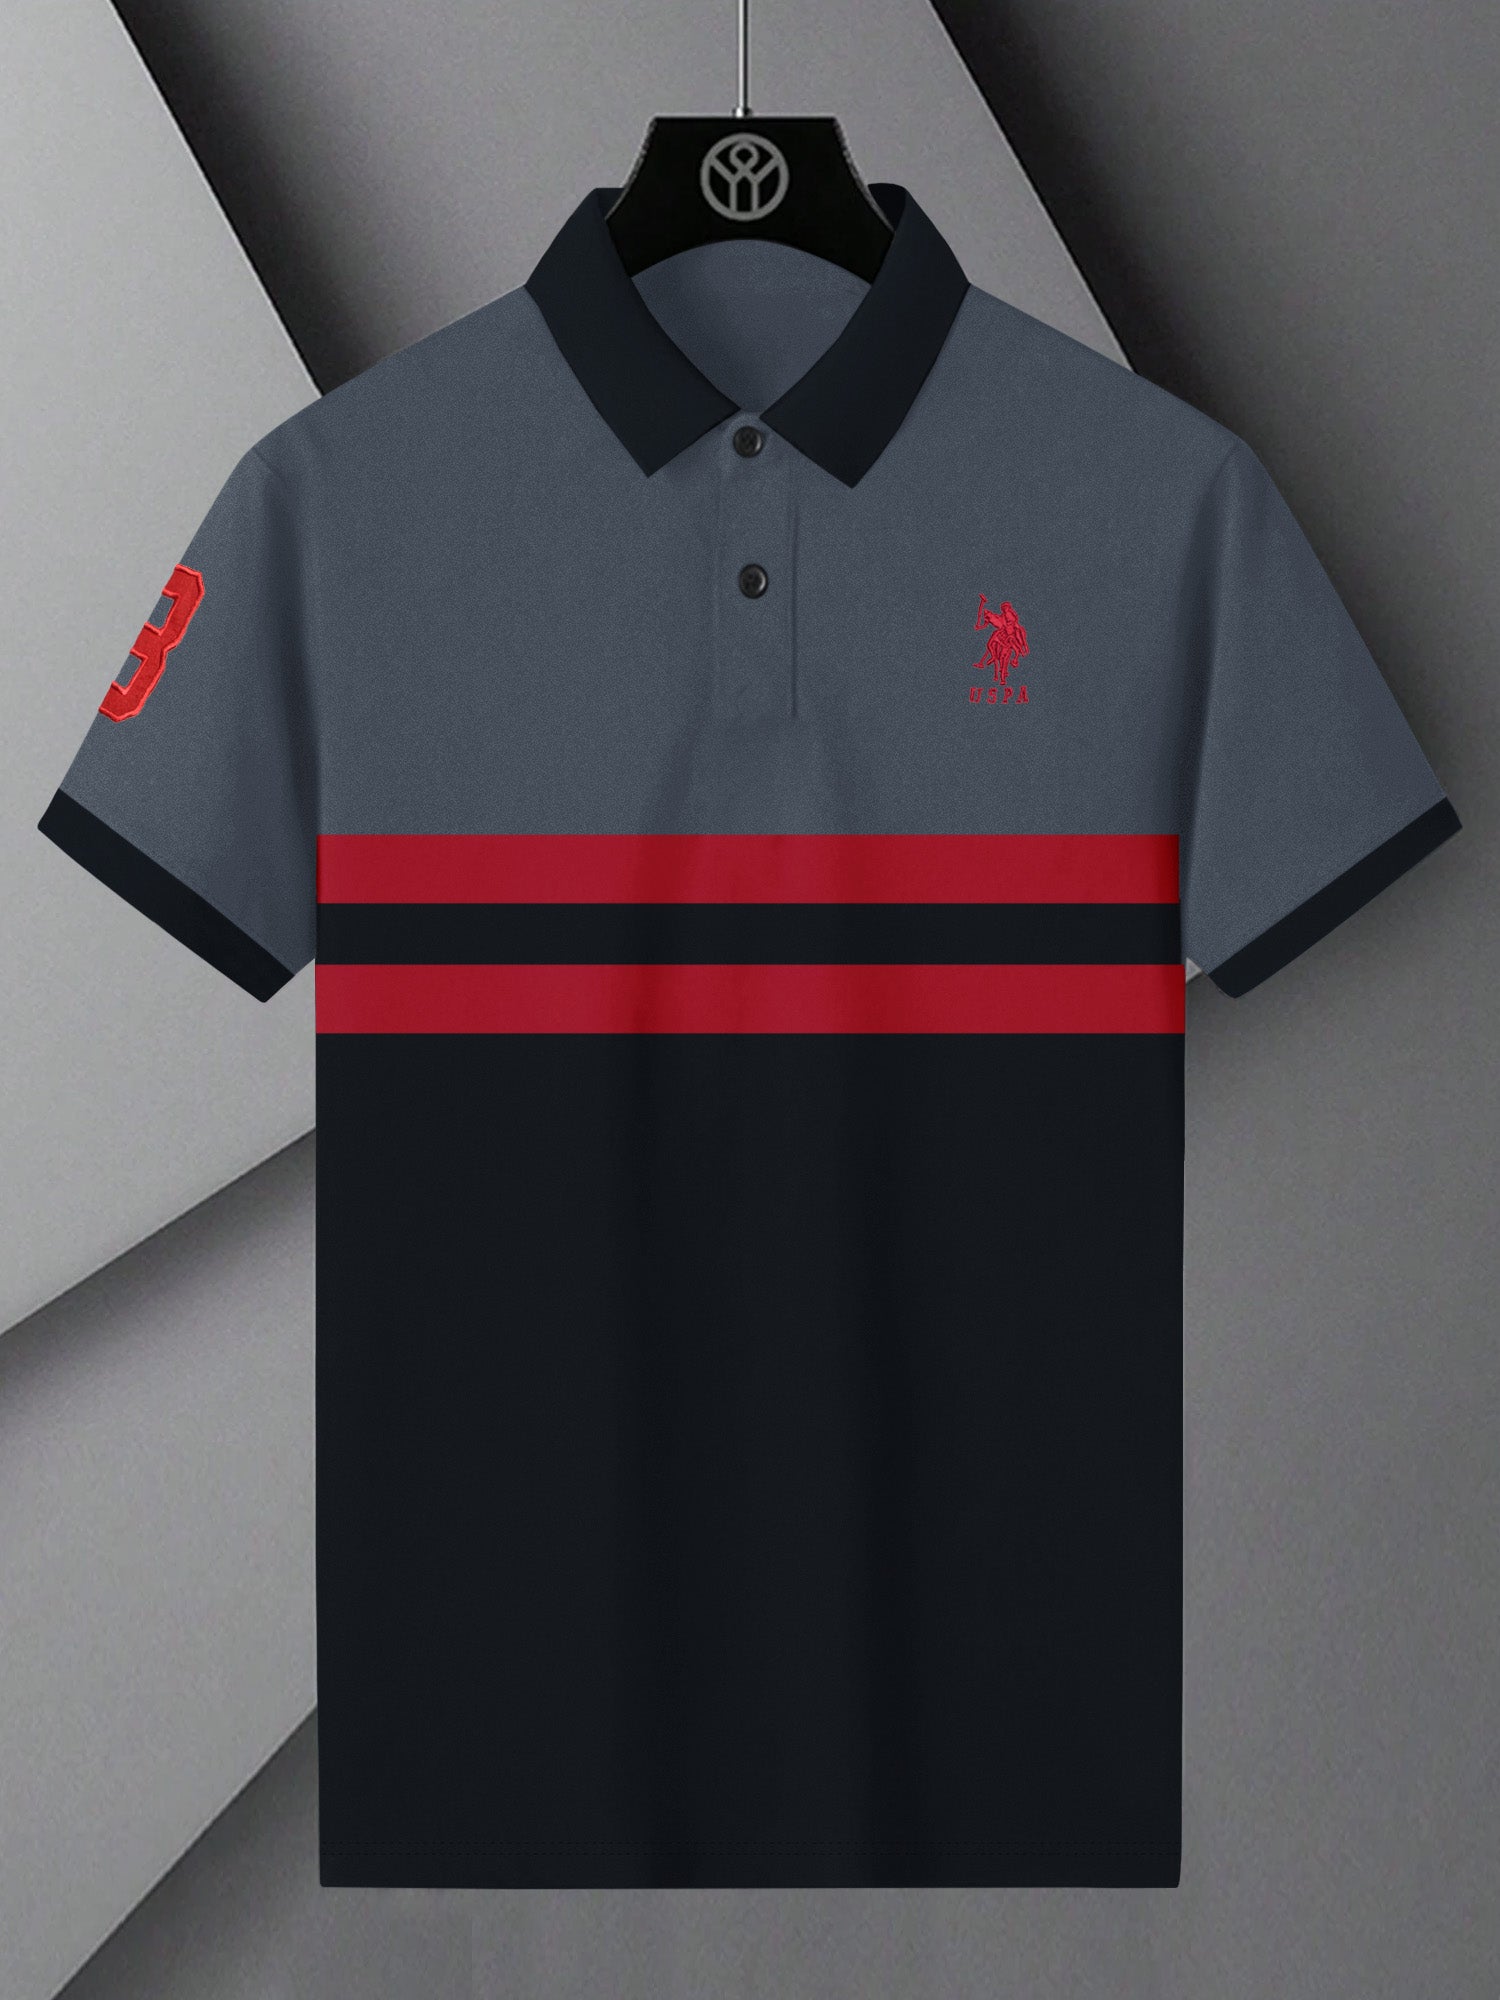 U.S Polo Assn. Summer Polo Shirt For Men-Slate Grey with Black & Red Panel-BE881/BR13119